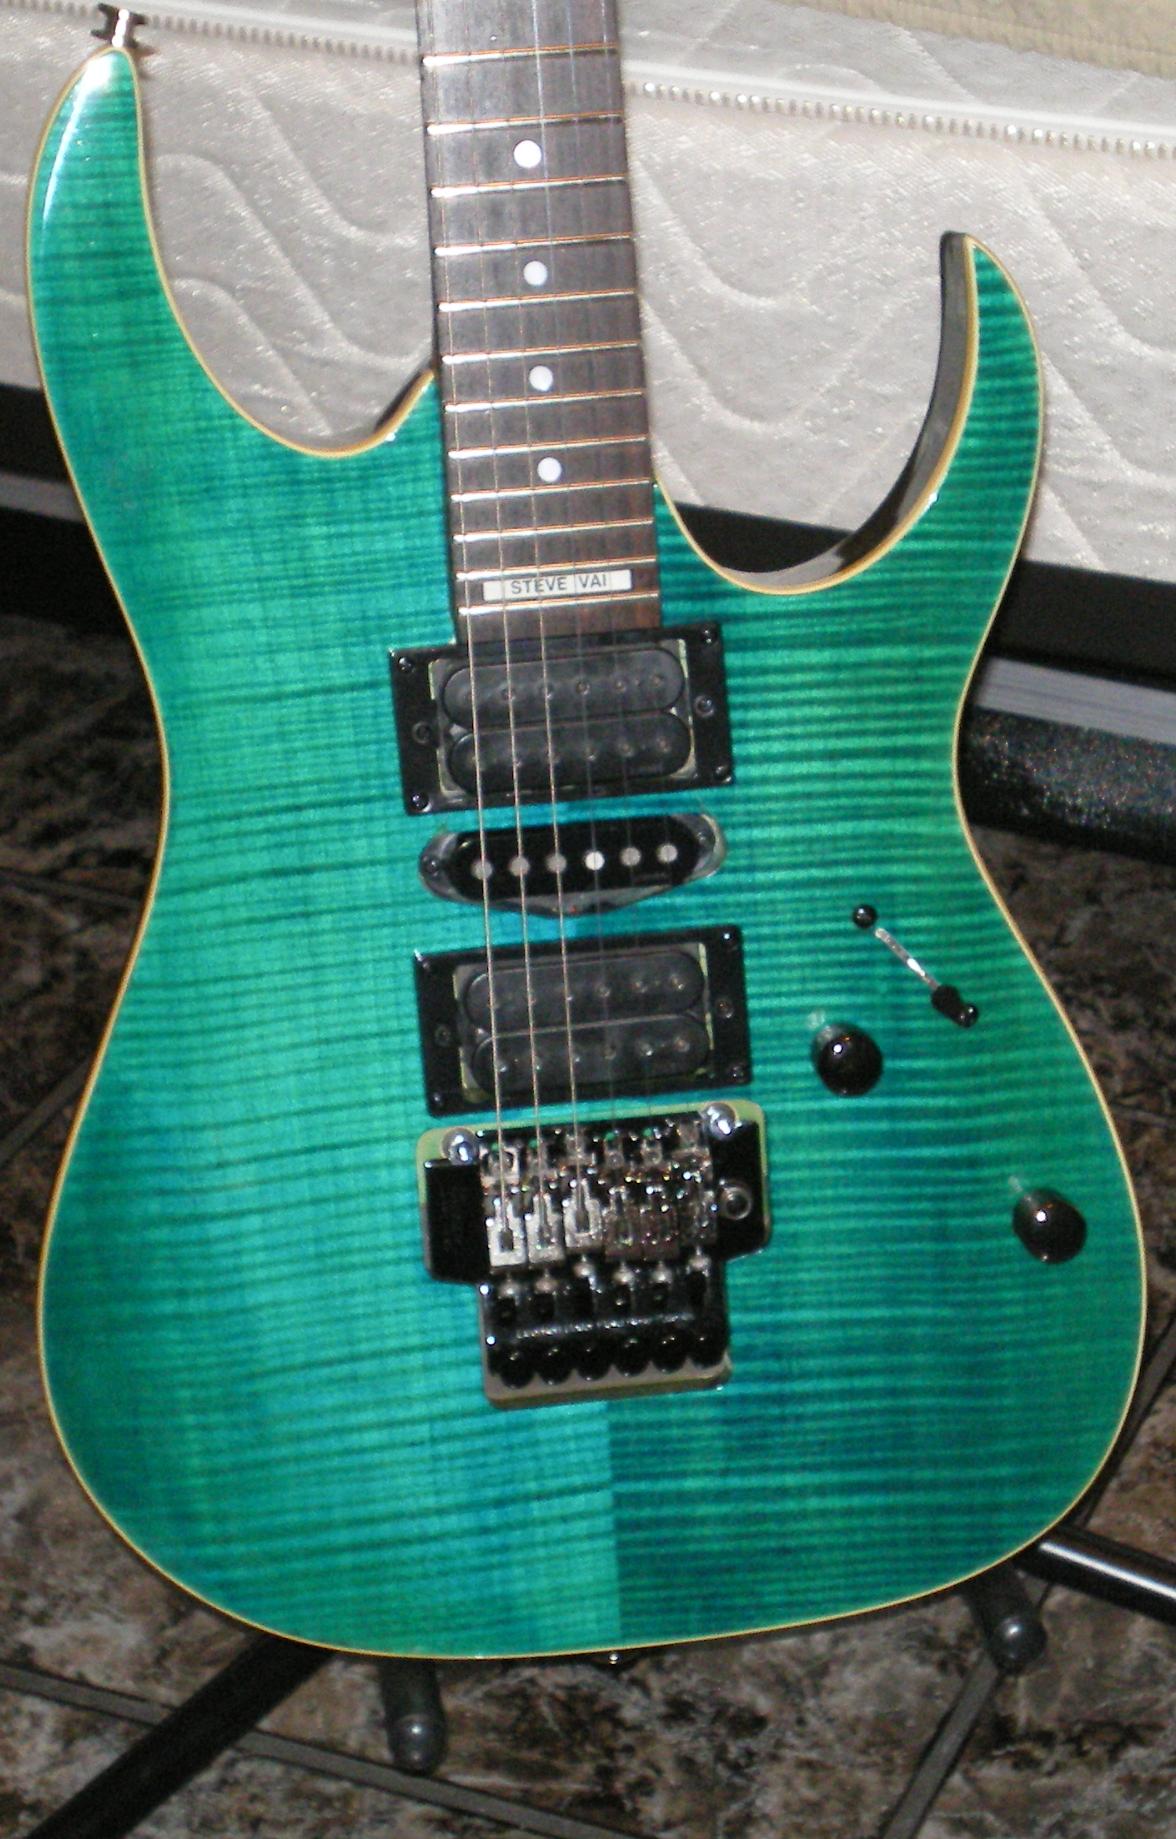  My Ibanez RG470 body rebuilt with a JEM 555 neck and electronics